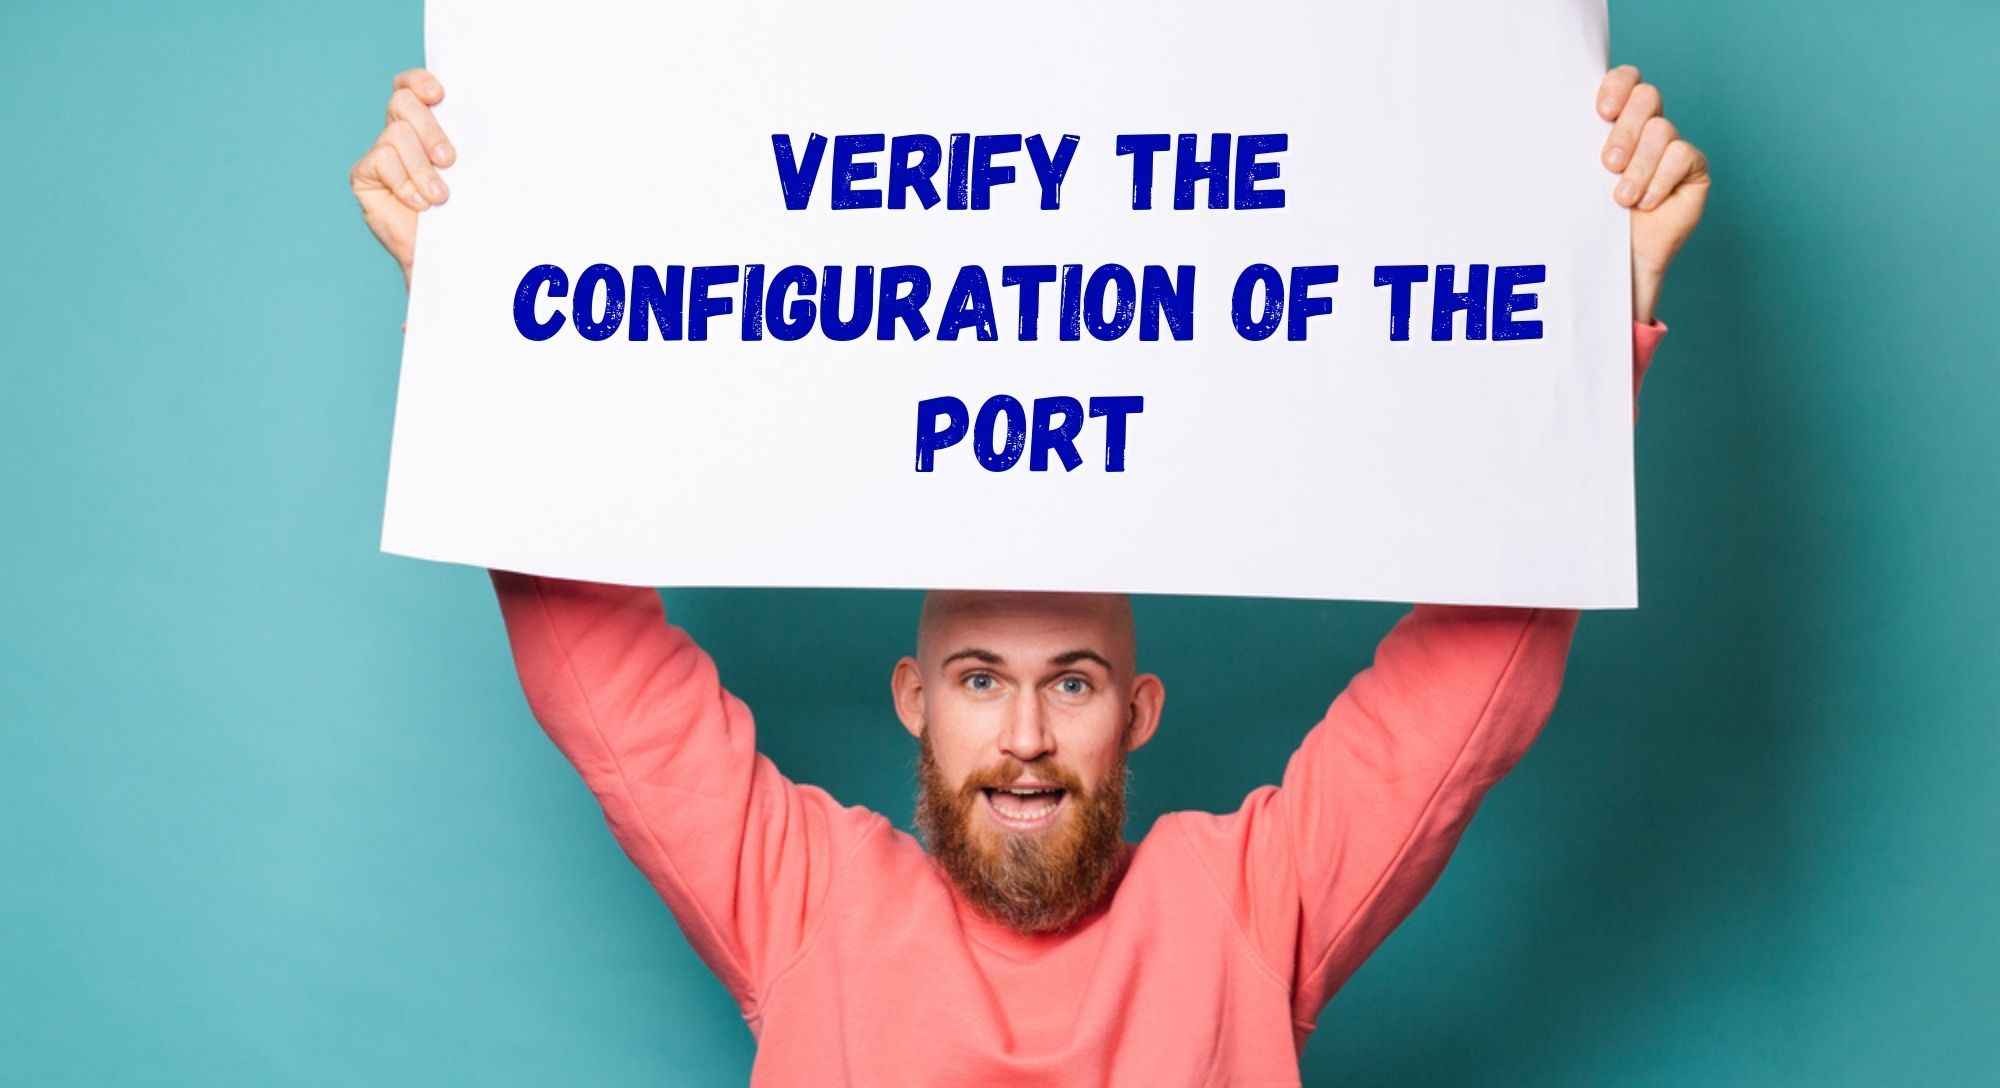 Verify the Configuration of the Port